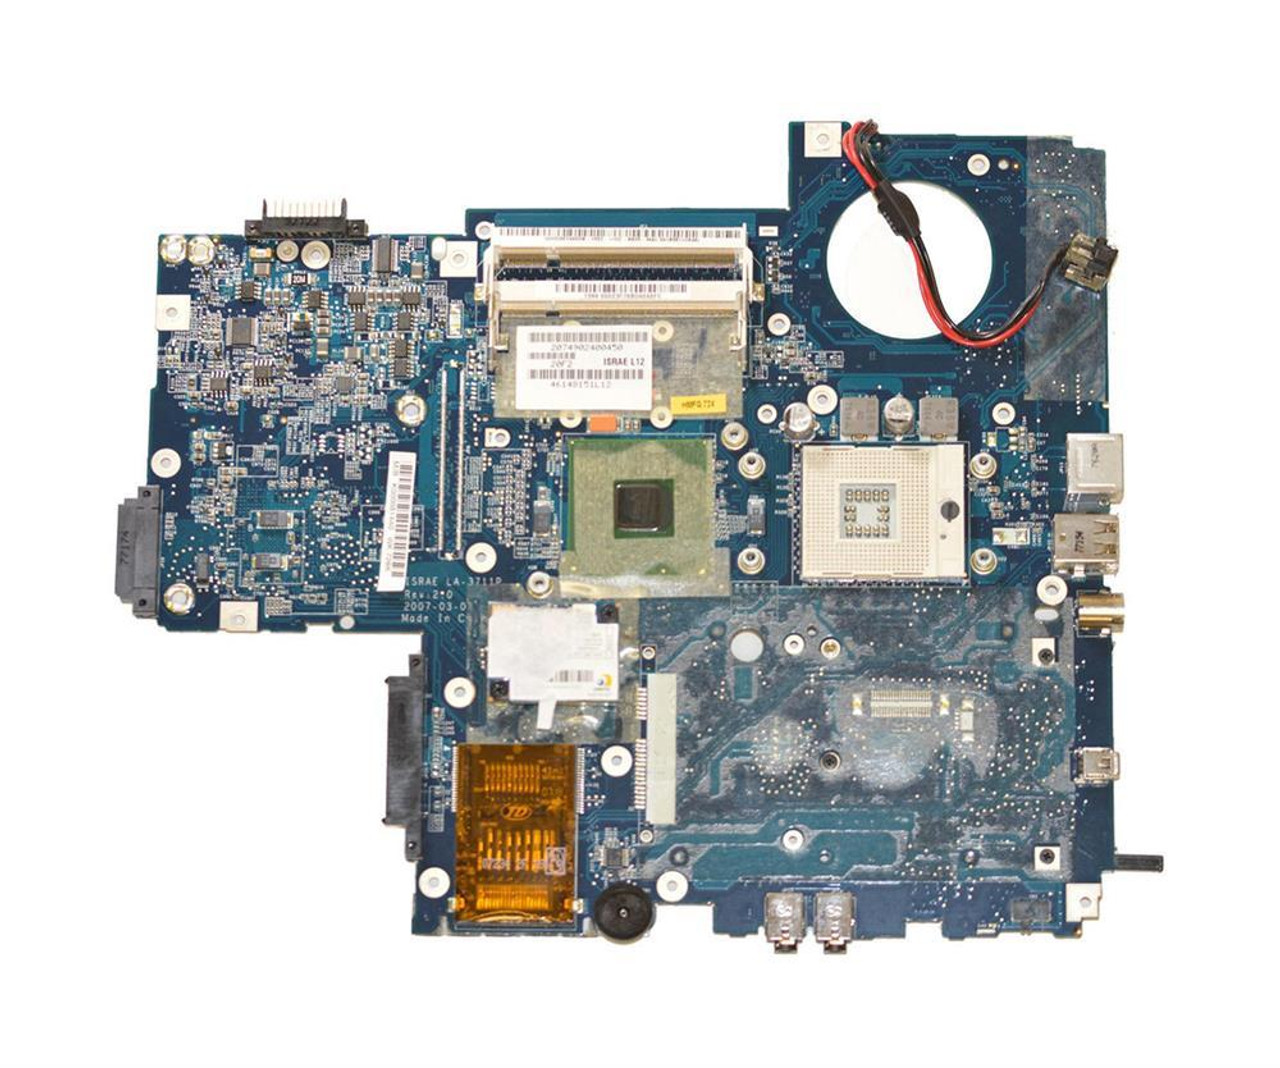 46148151L14 Toshiba System Board (Motherboard) for Satellite P200 P205 (Refurbished)